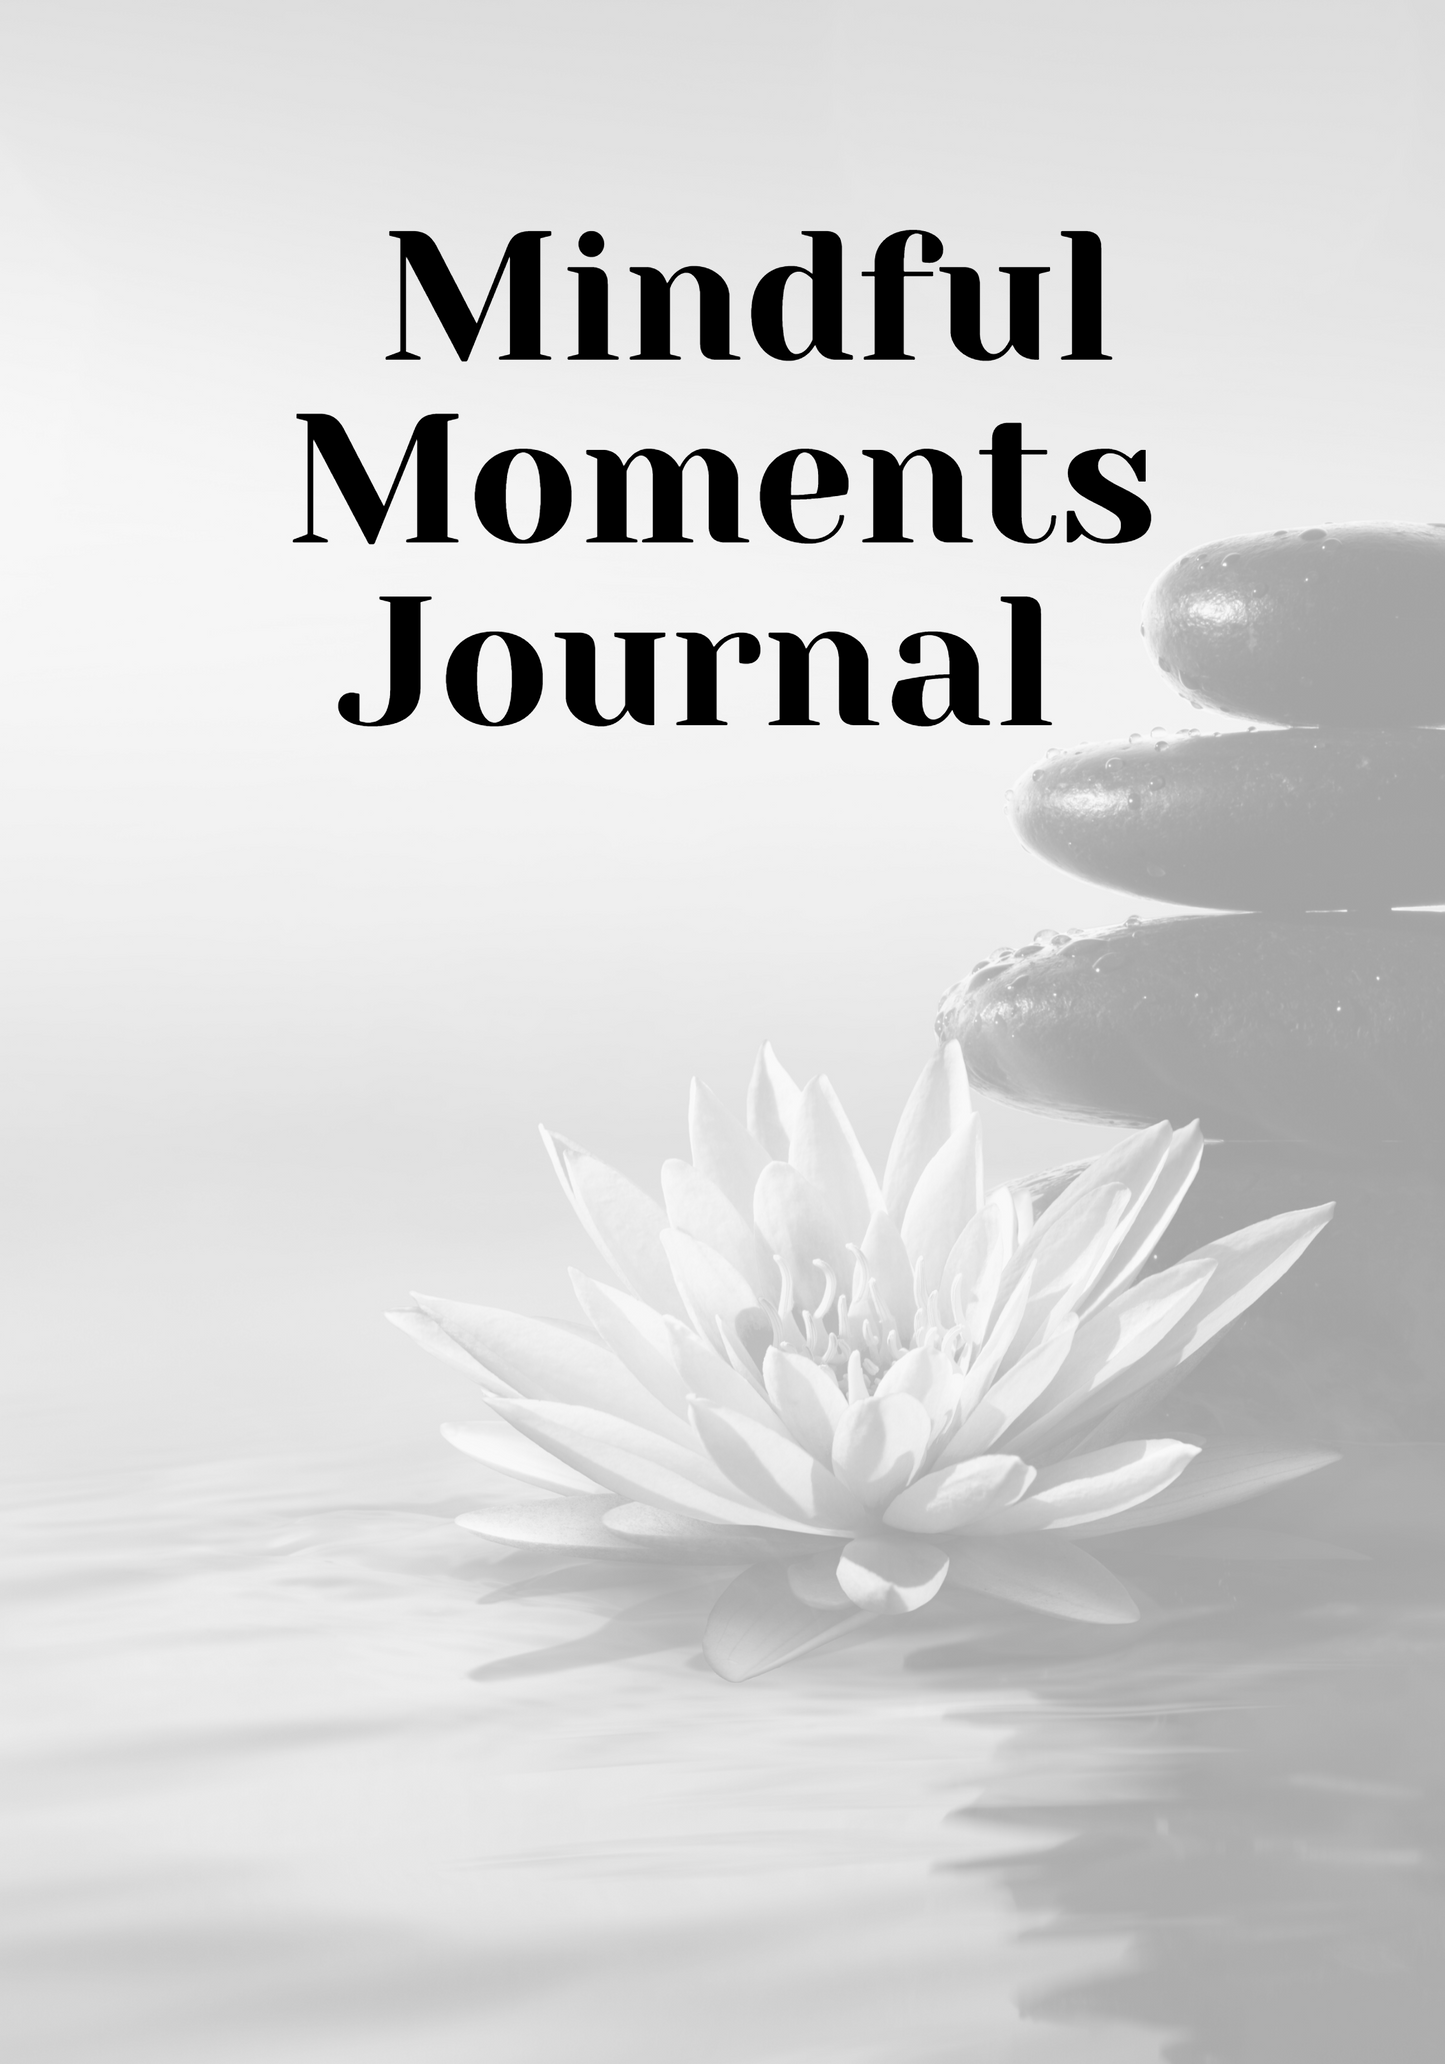 Mindful Moments Journal